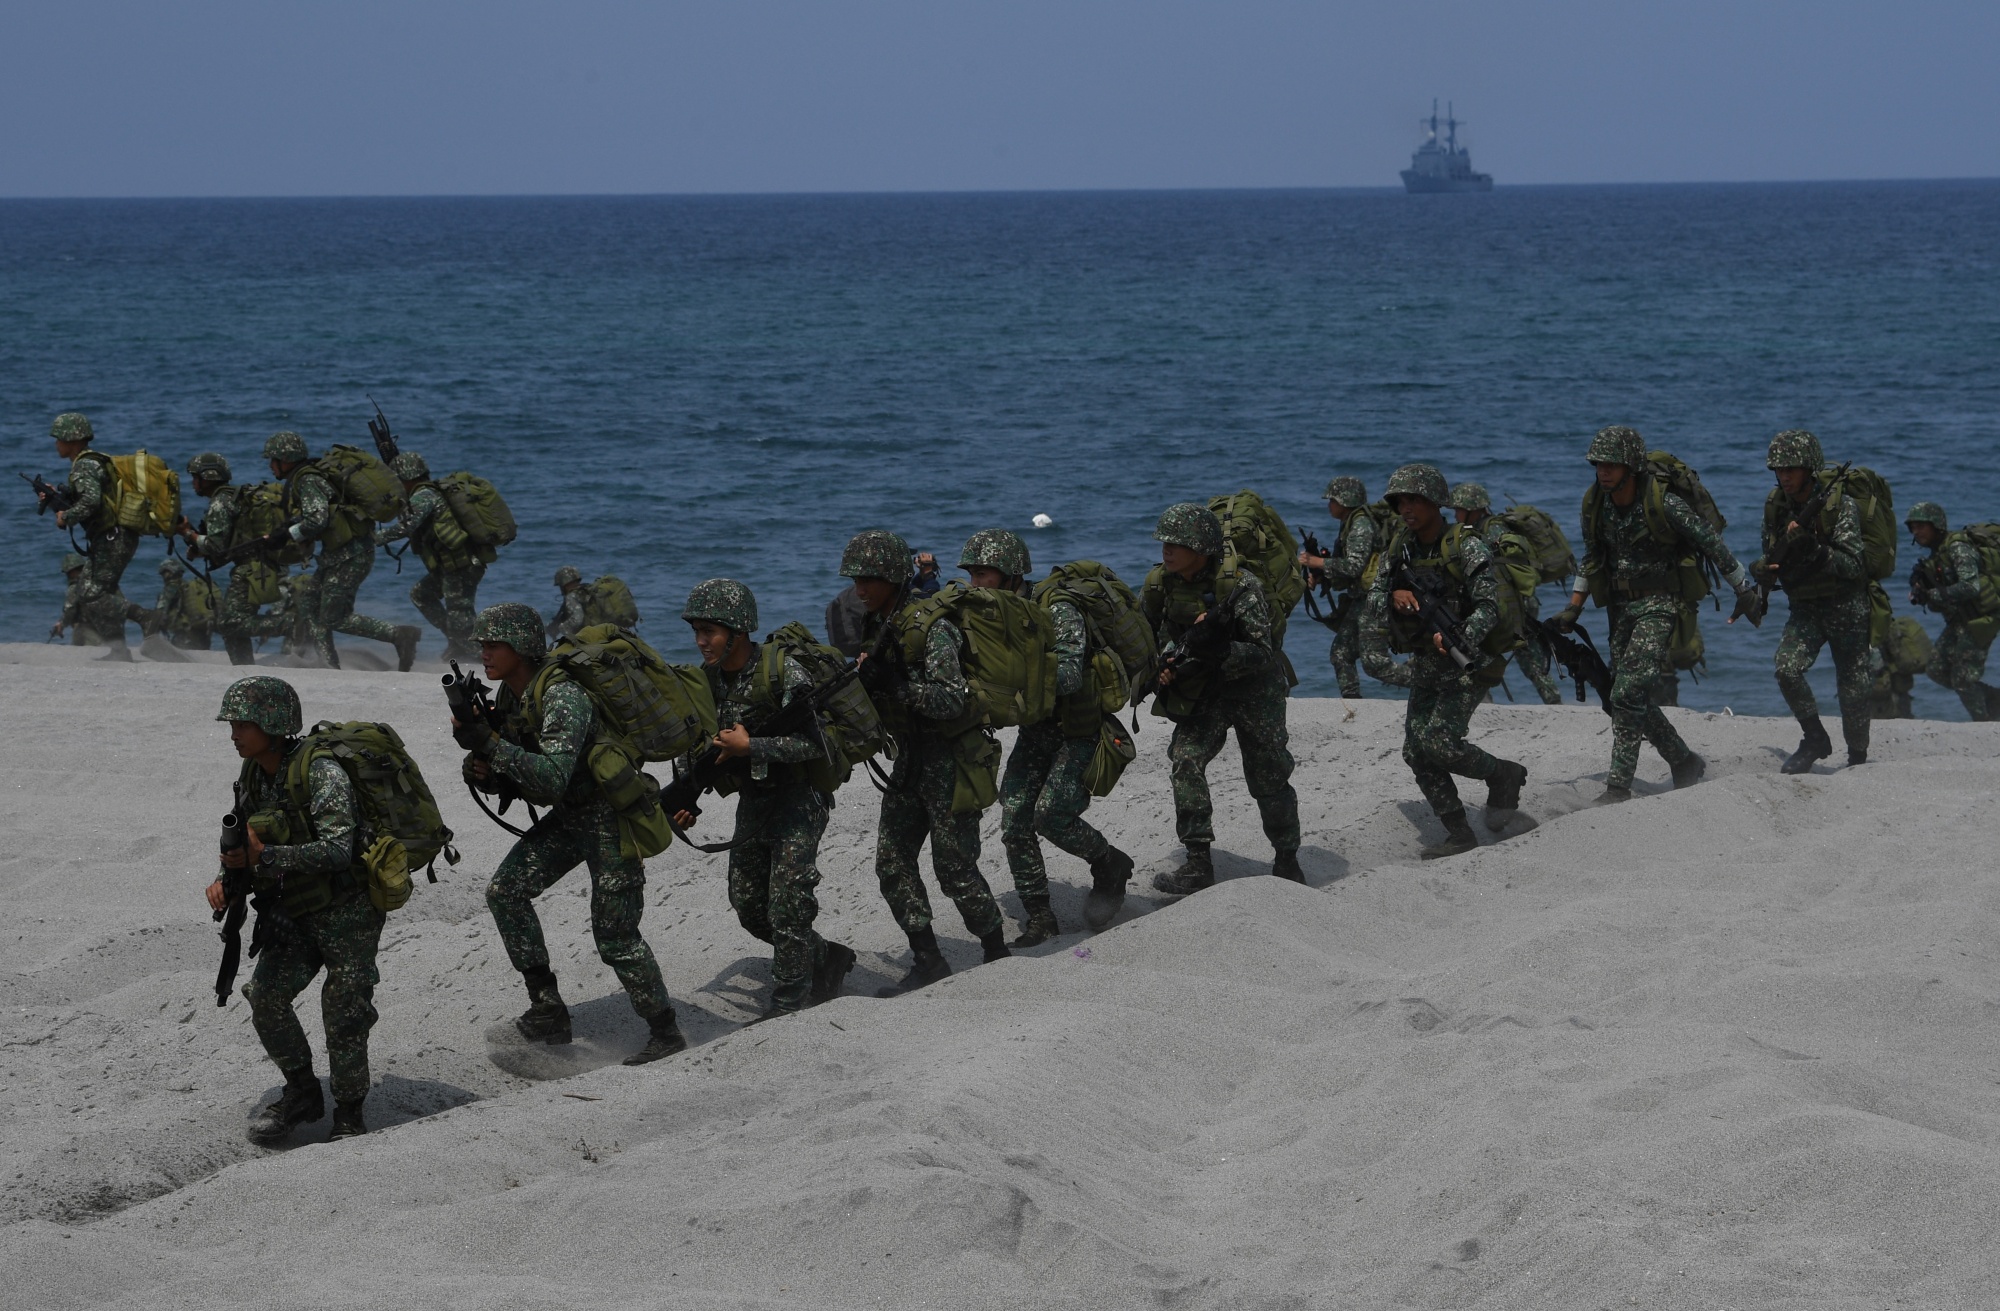 Philippine marines take position as part of the annual Philippines and US joint military exercise at the beach of Philippine navy's training camp in San Antonio, Zambales province in Philippines in 2019.